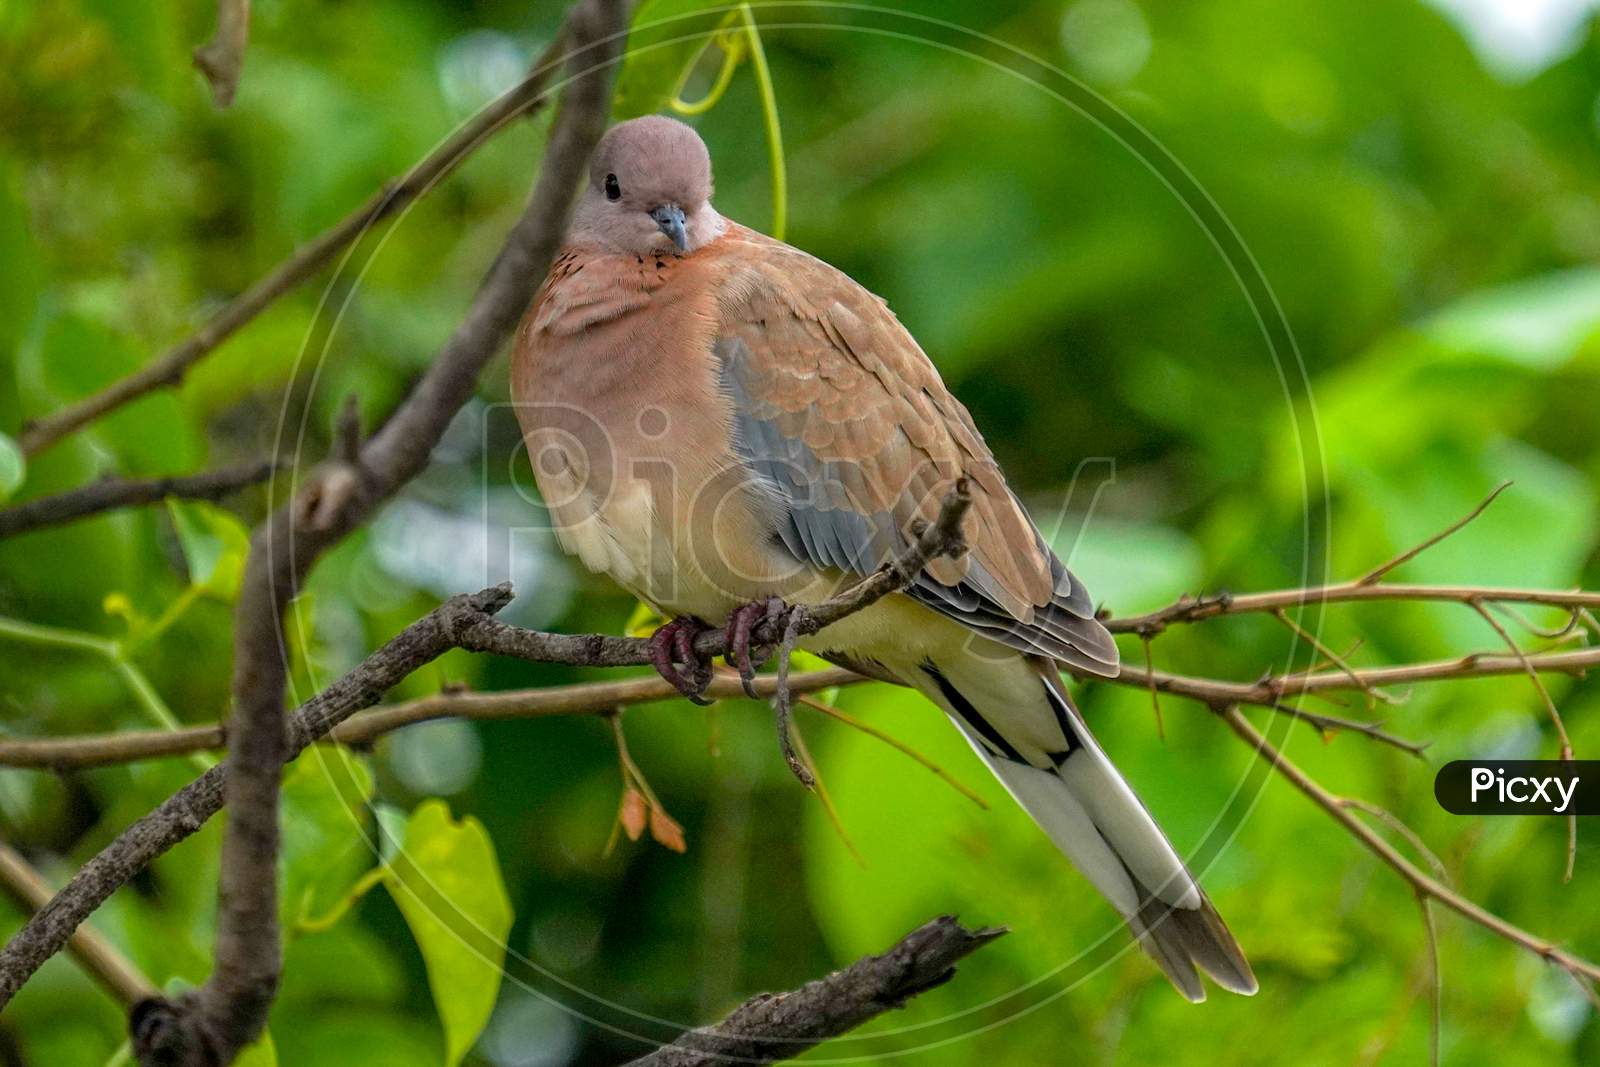 Laughing dove posing for pick